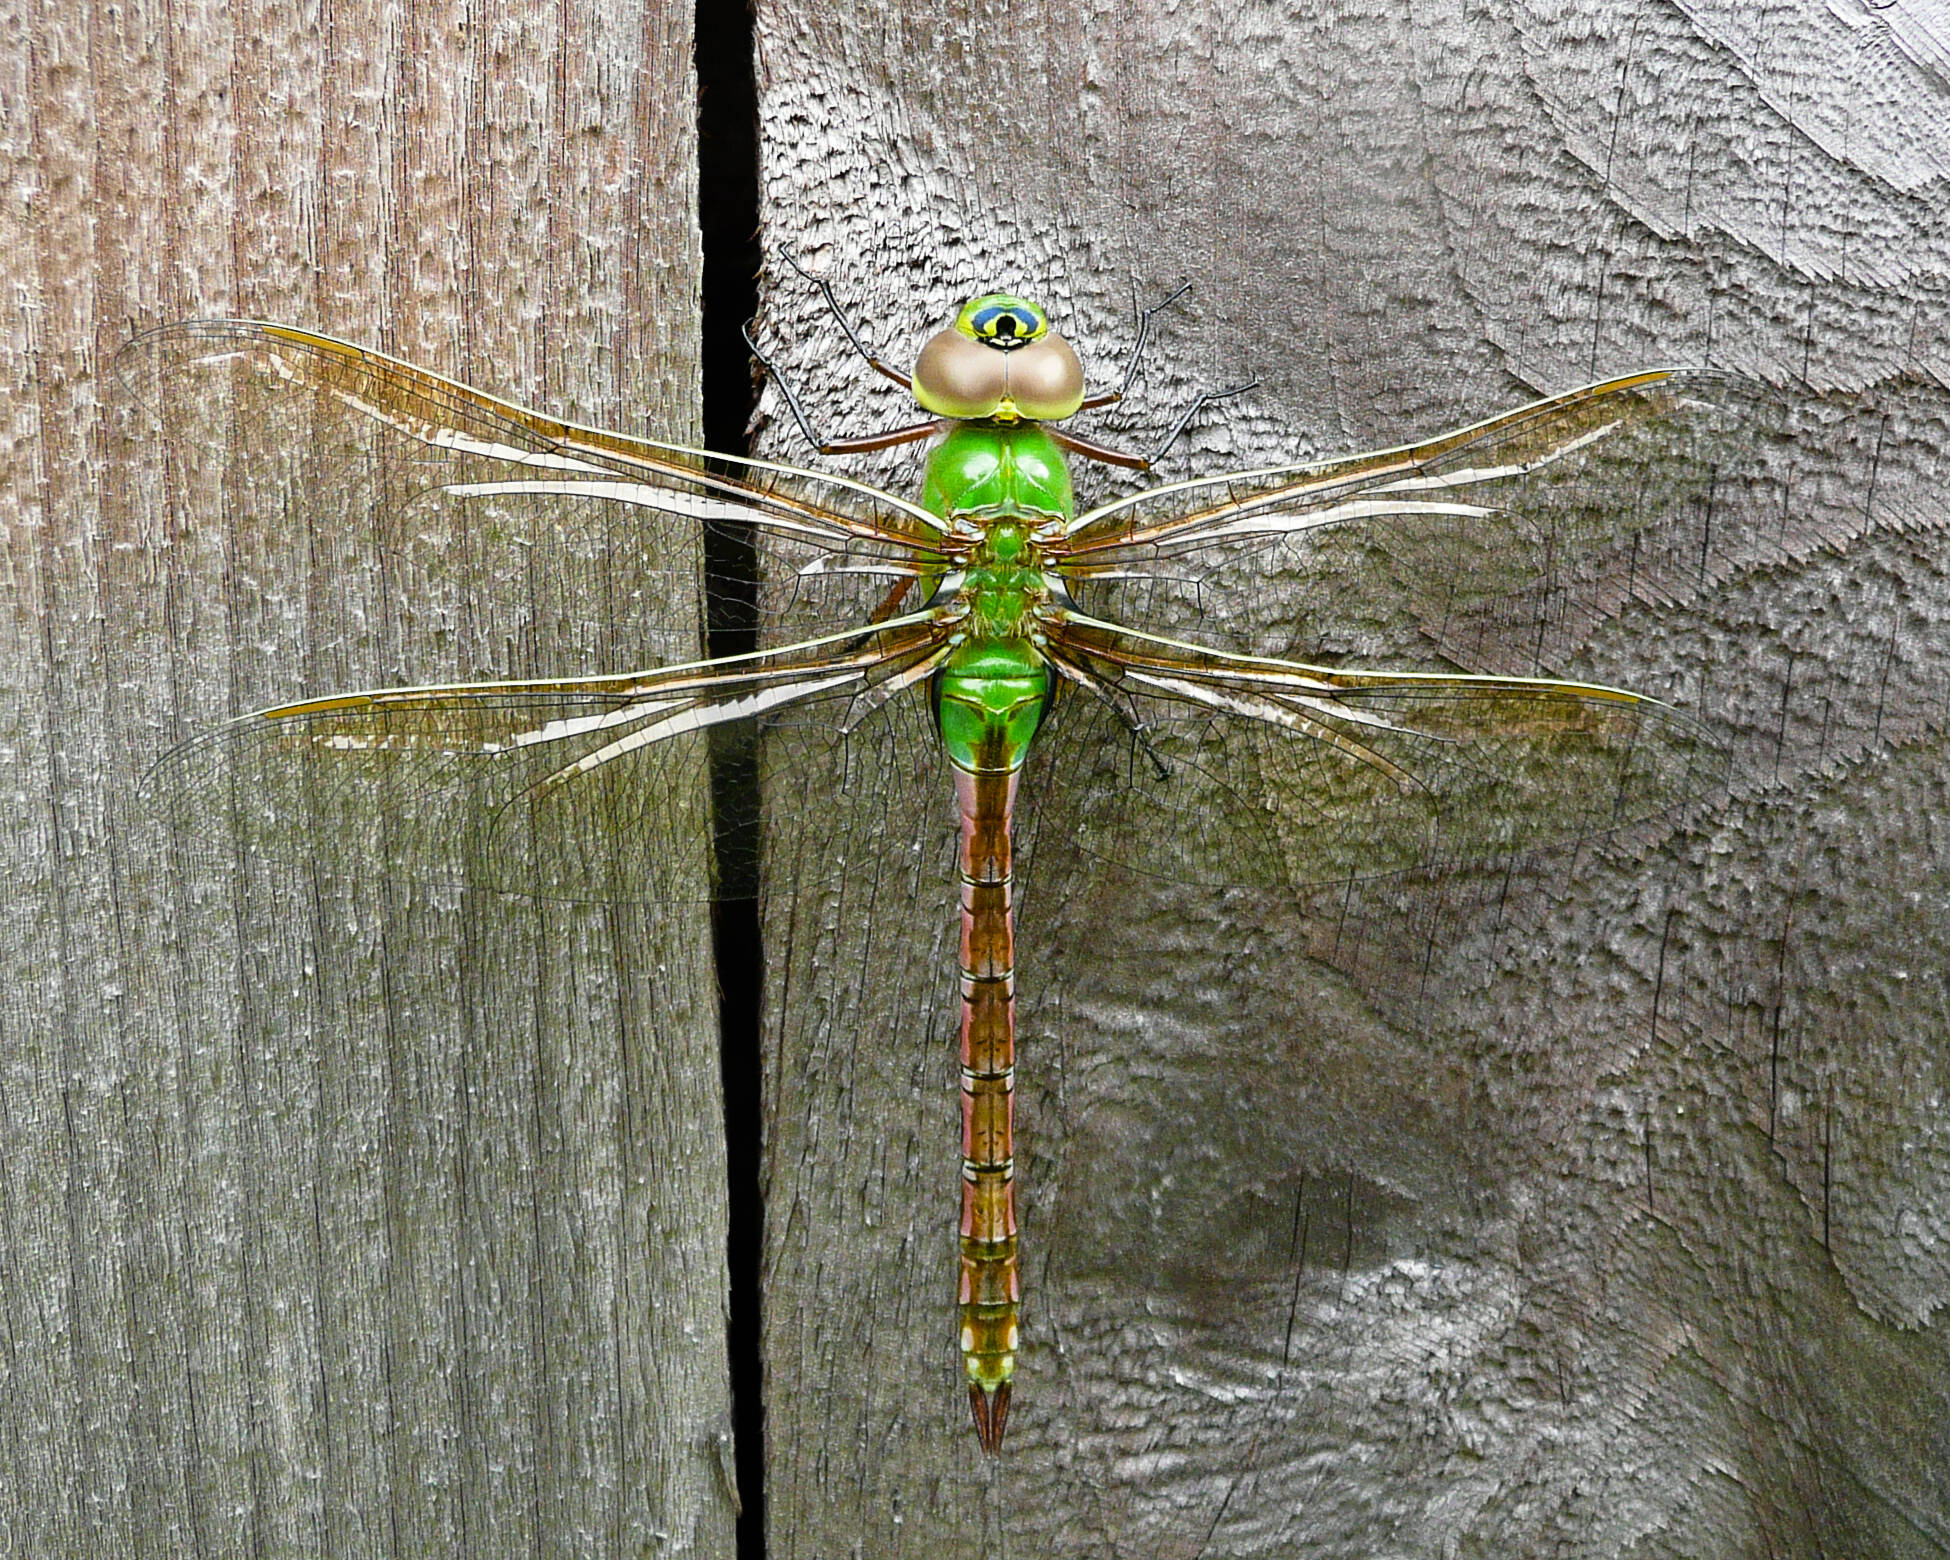 This photo available under a creative commons license shows a green darner. They range over most of North America, coast to coast, from southern Canada to Mexico, Hawaii, and beyond. They don’t get to Alaska except by accident of vagrant winds. But their regular migrations take them from the northern part of the range to the southern part in fall, and back again in spring. (Chuck Evans Mcevan)